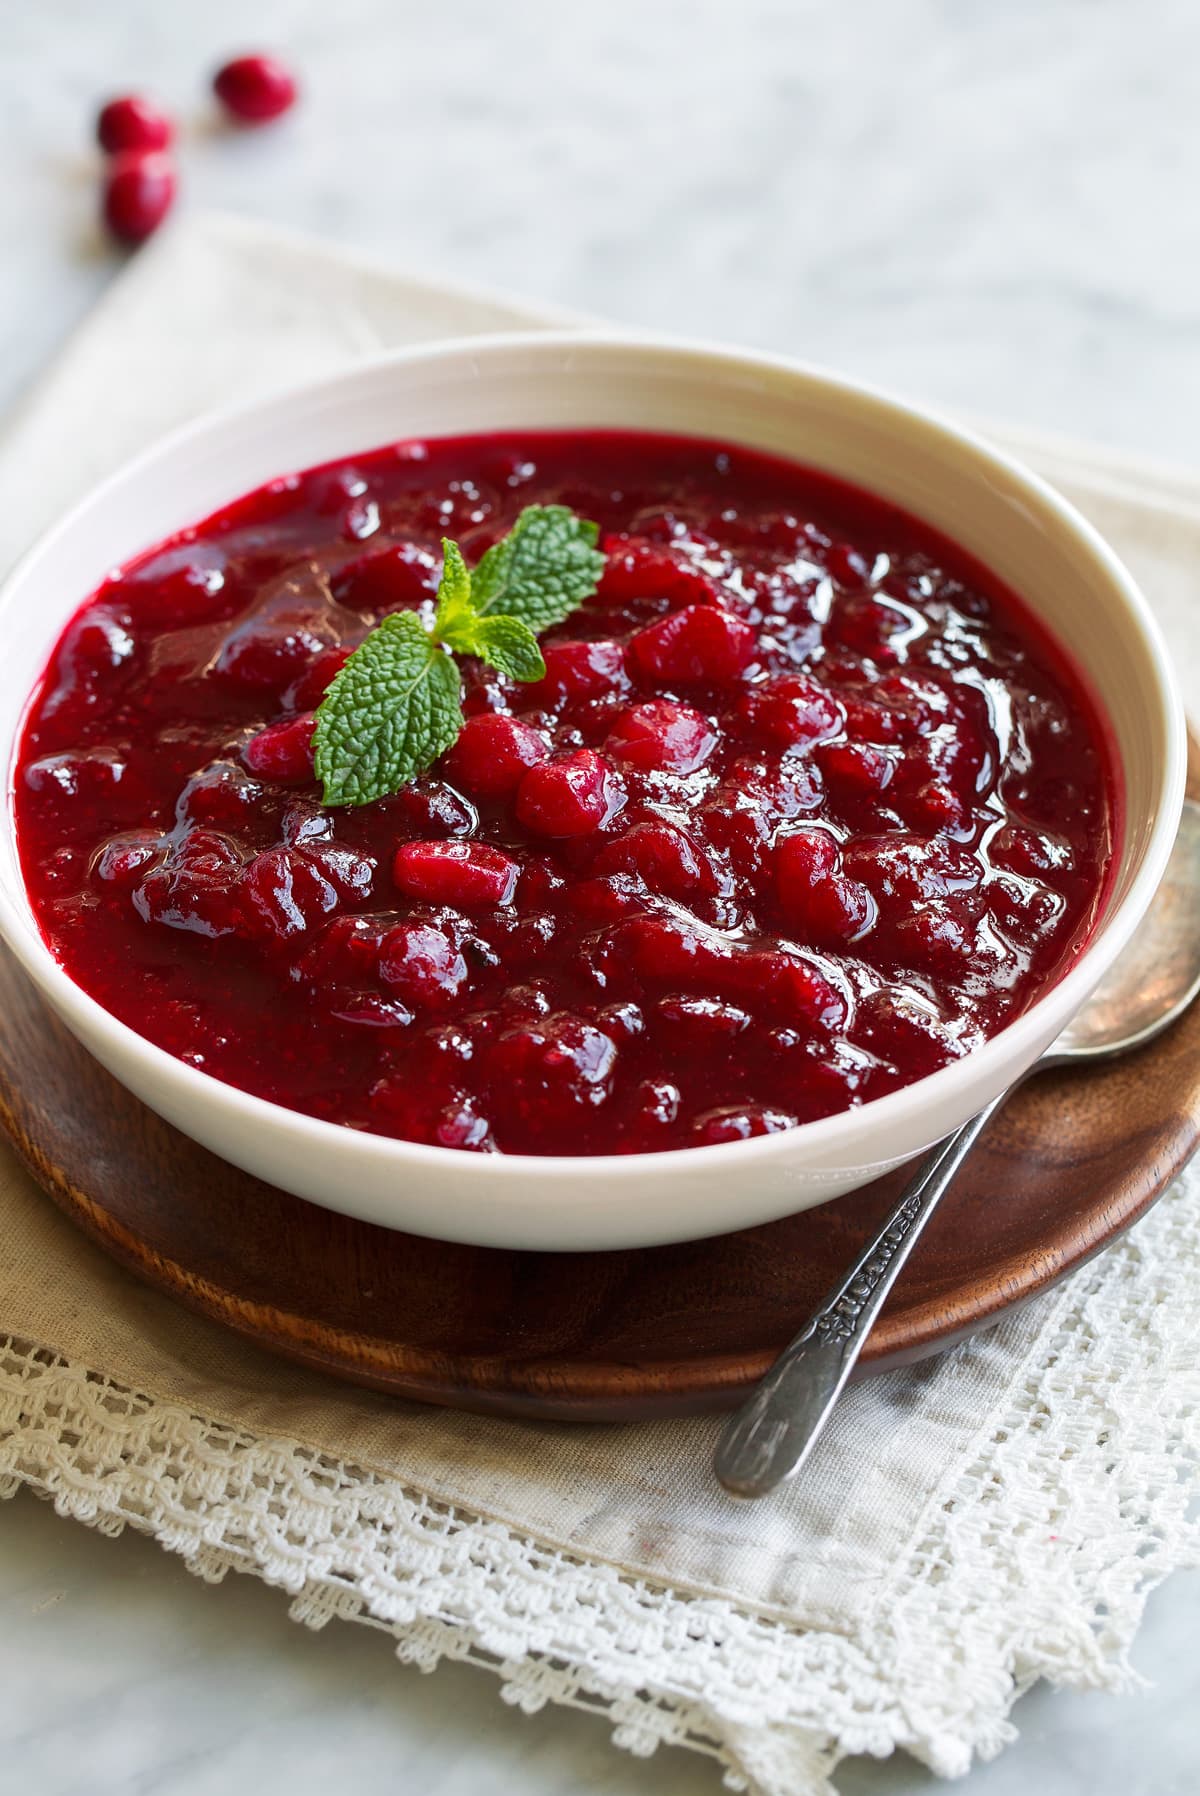 Cranberry Sauce Recipe (Fresh and Easy!) - Cooking Classy